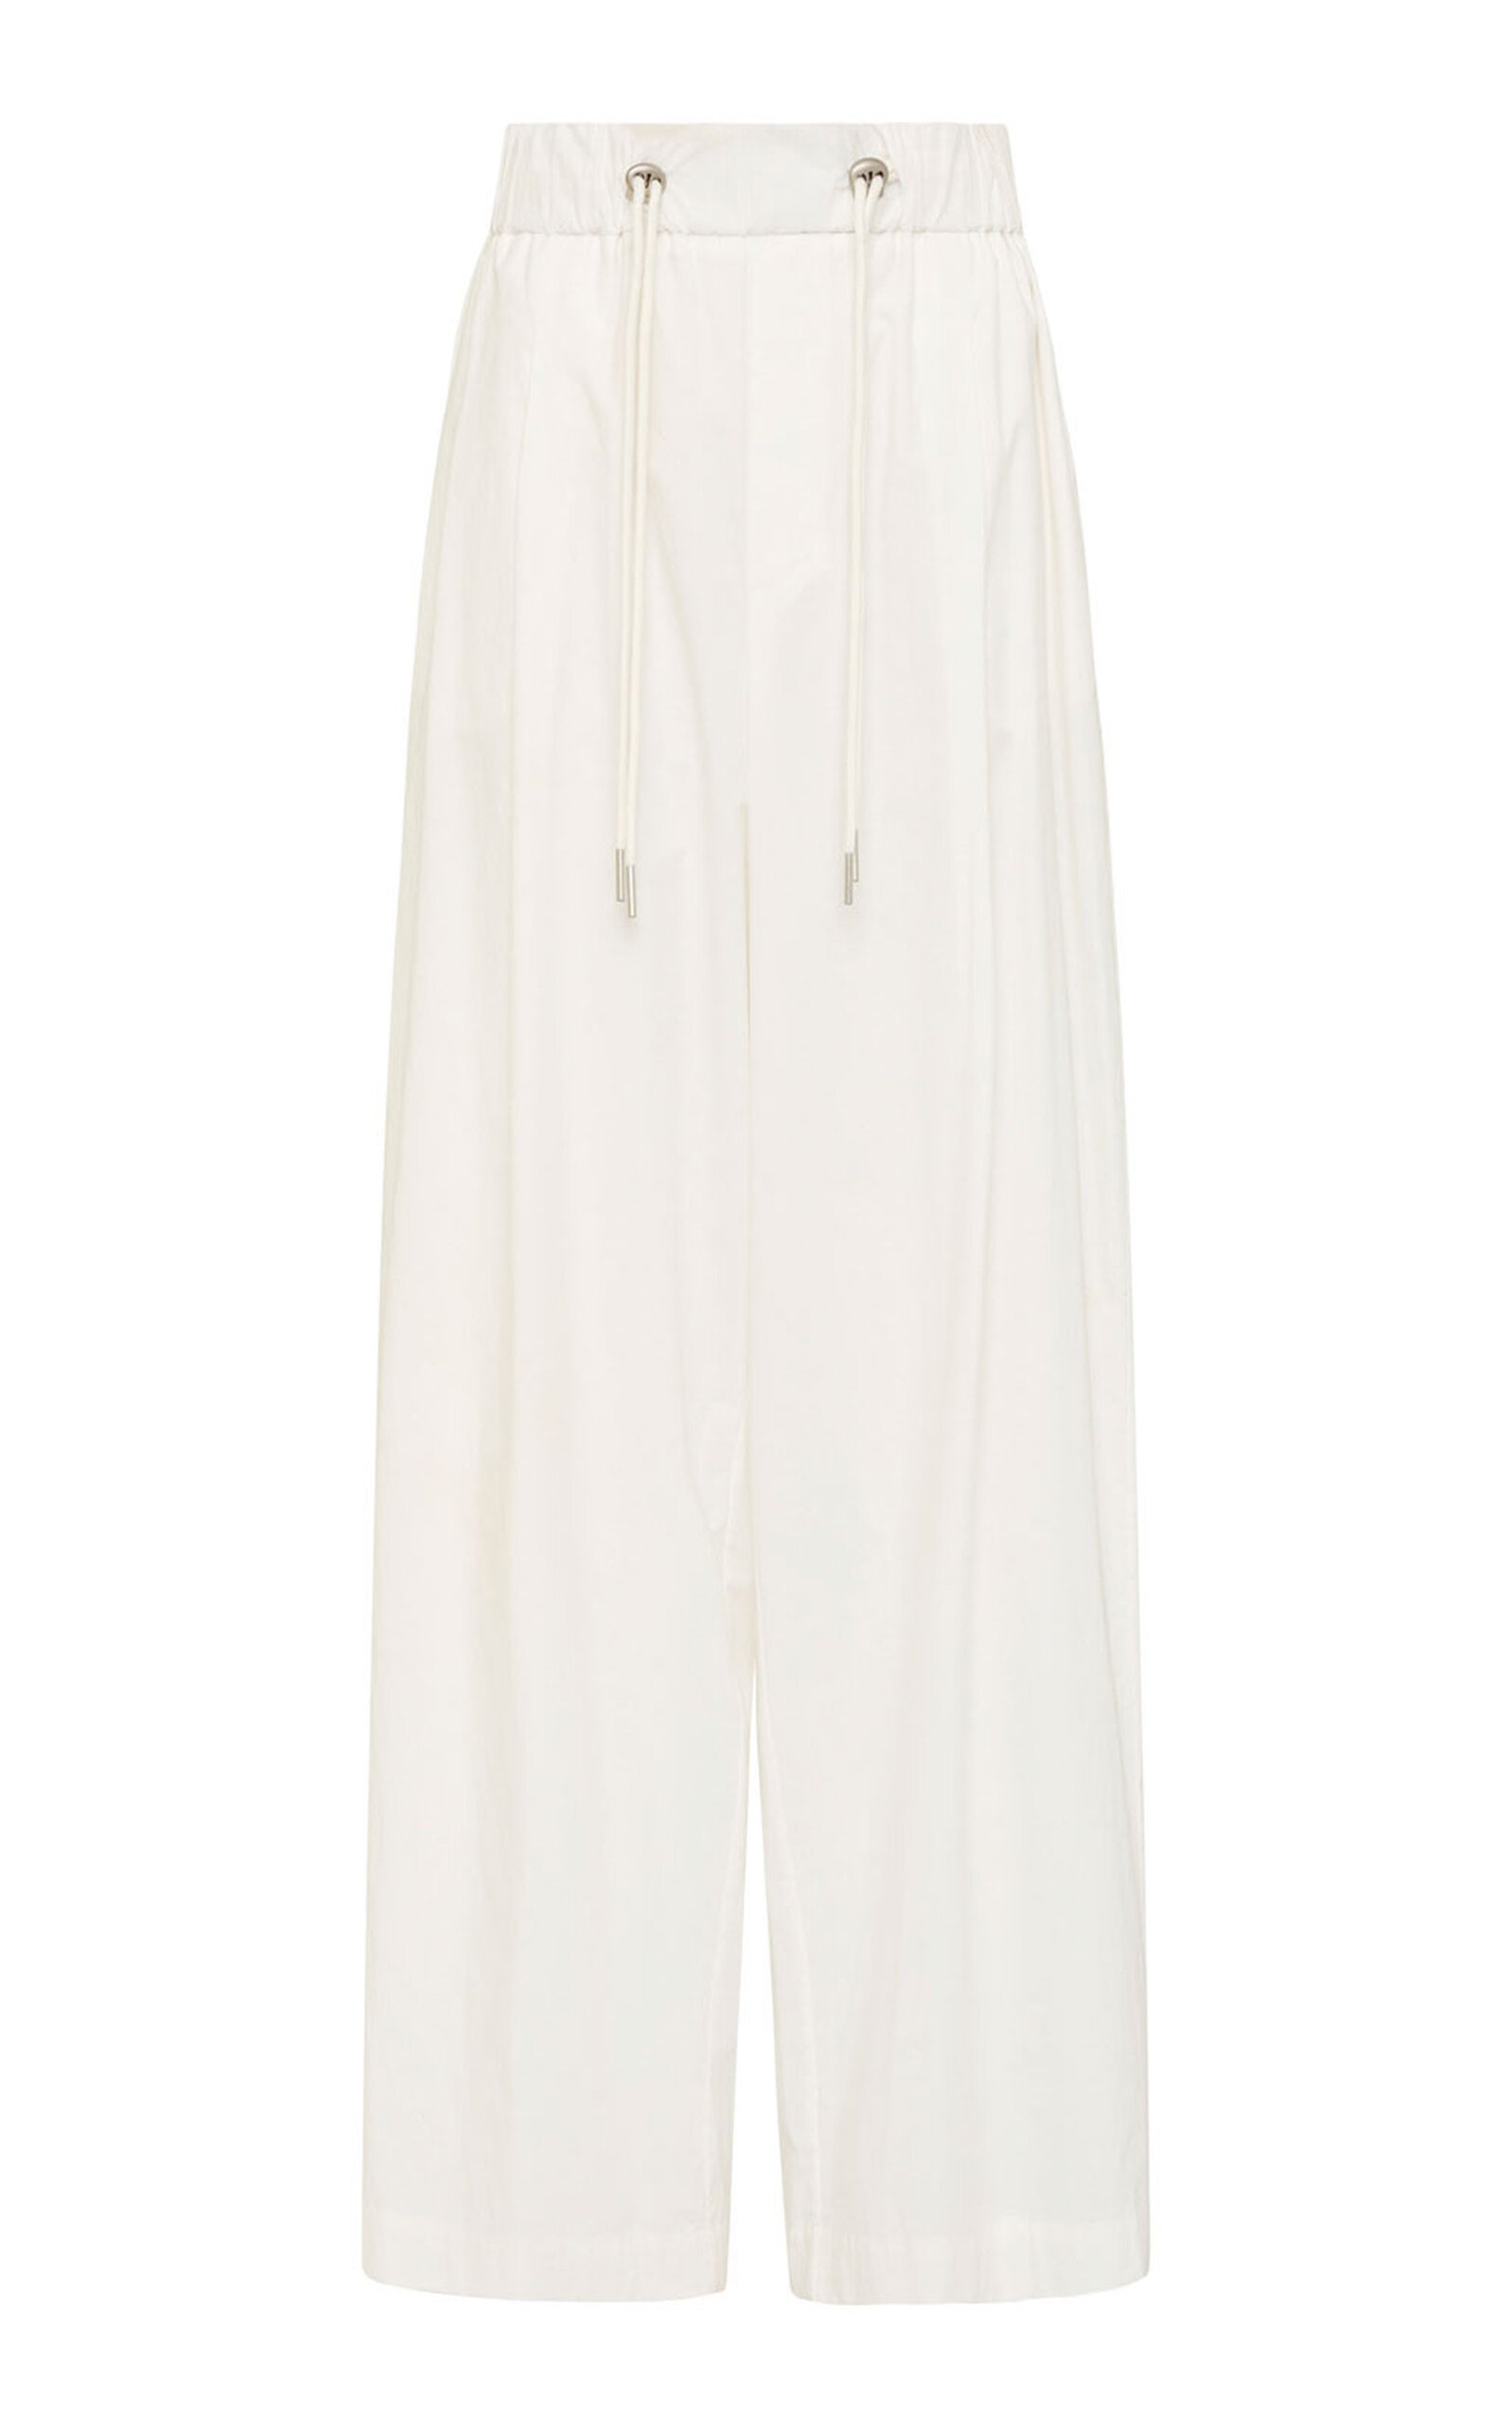 St. Agni Relaxed Drawstring Cotton Pants In White